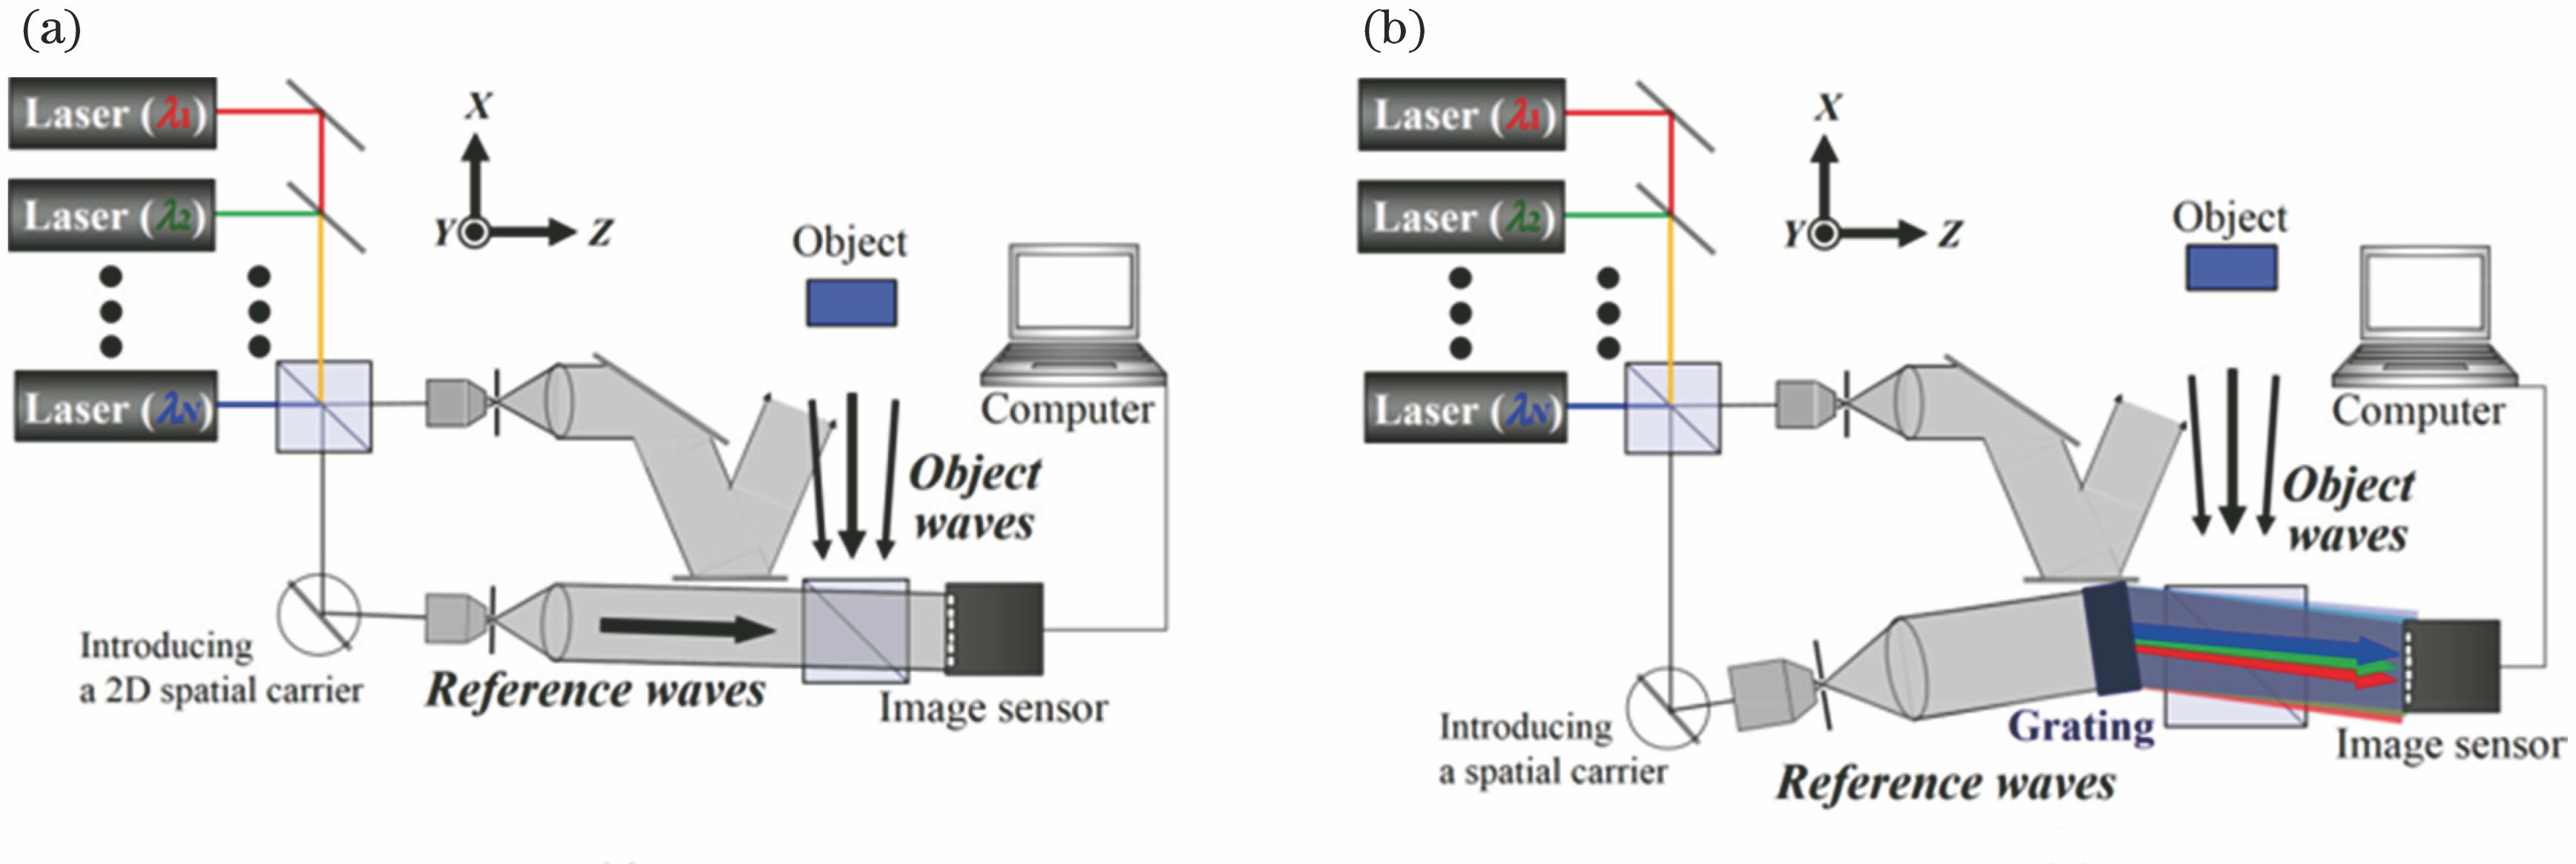 Optical setup of single reference beam method[28]. (a) Controlling the spatial carrier through using a mirror; (b) using a mirror and a grating